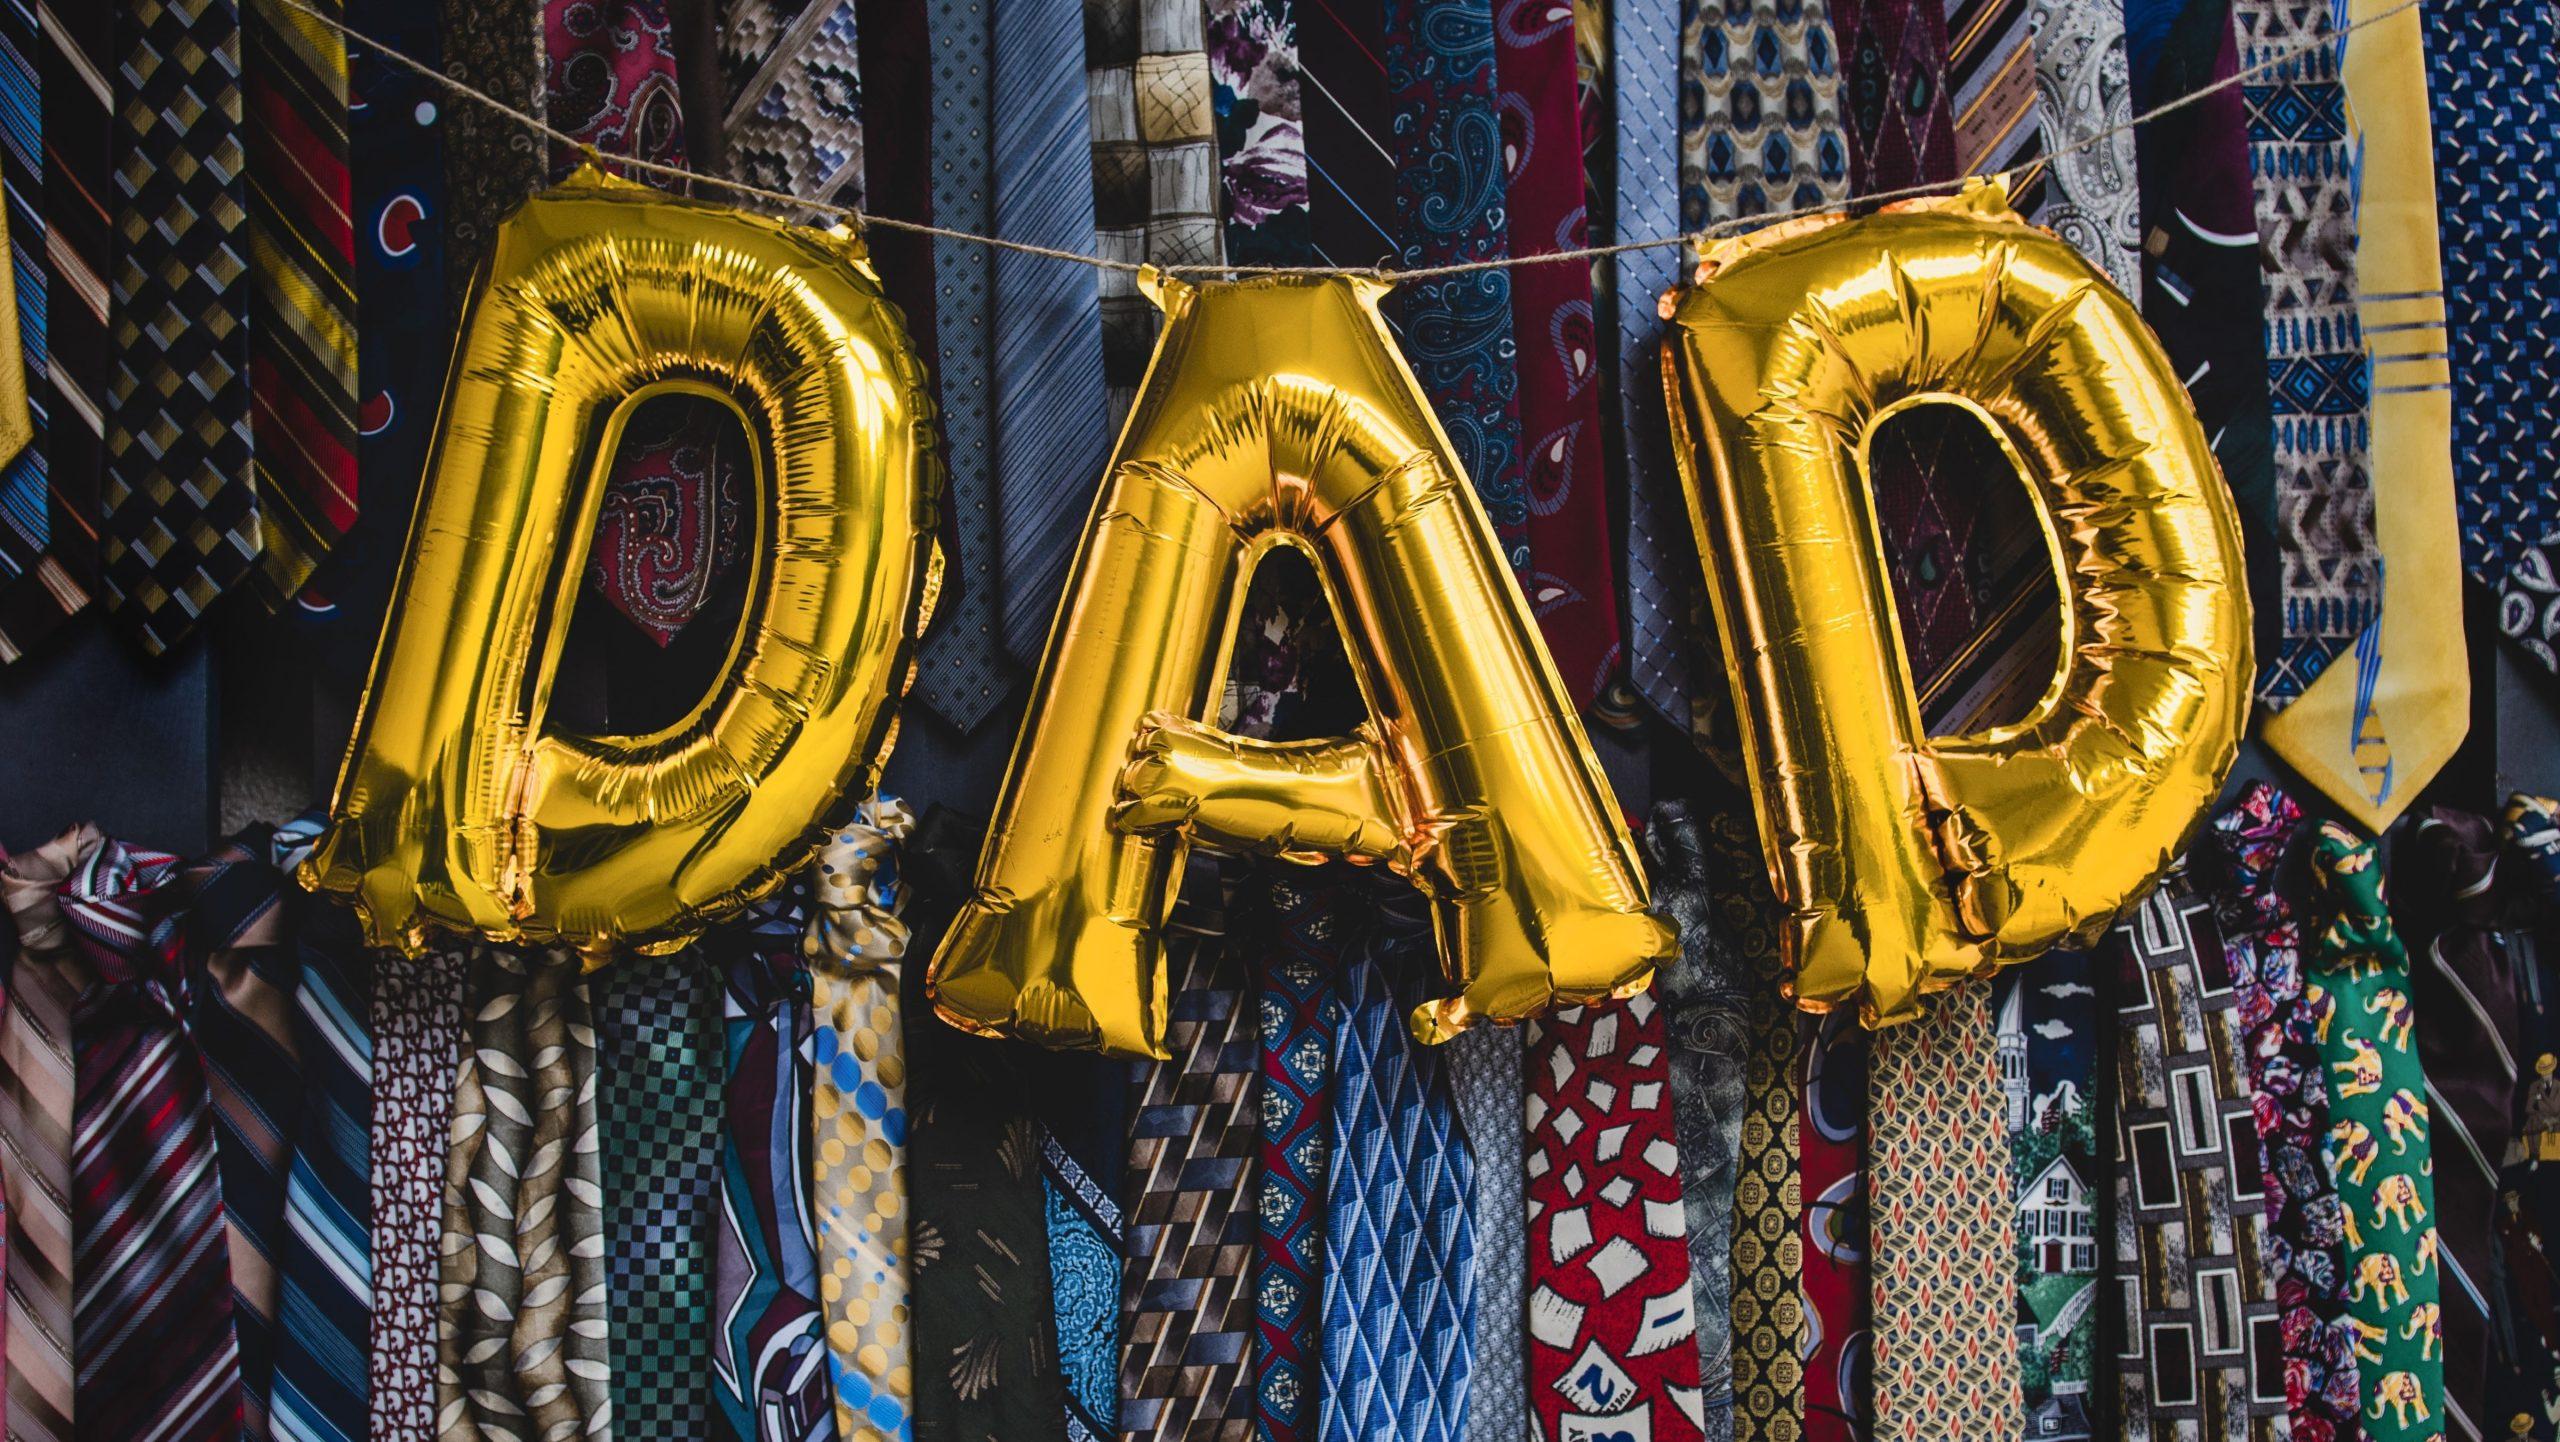 Giant party balloons spelling the word 'Dad' against a backdrop of neck ties.